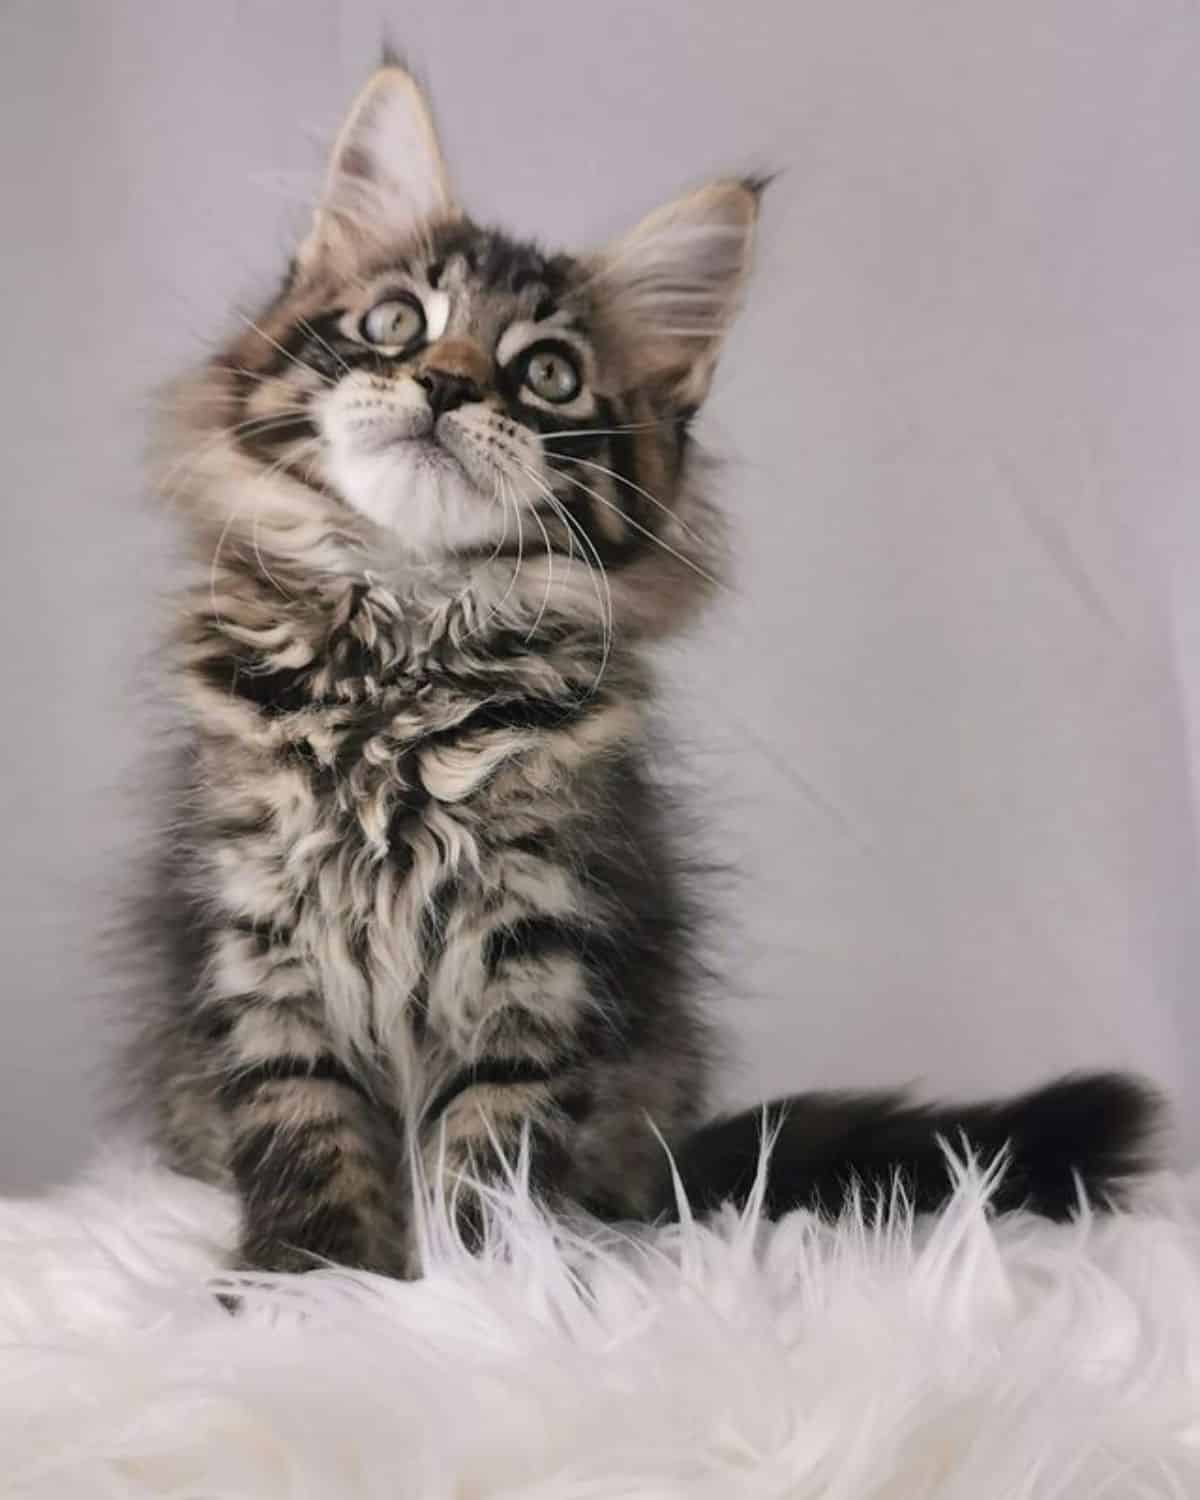 A cute fluffy maine coon kitten sitting on a white fur.